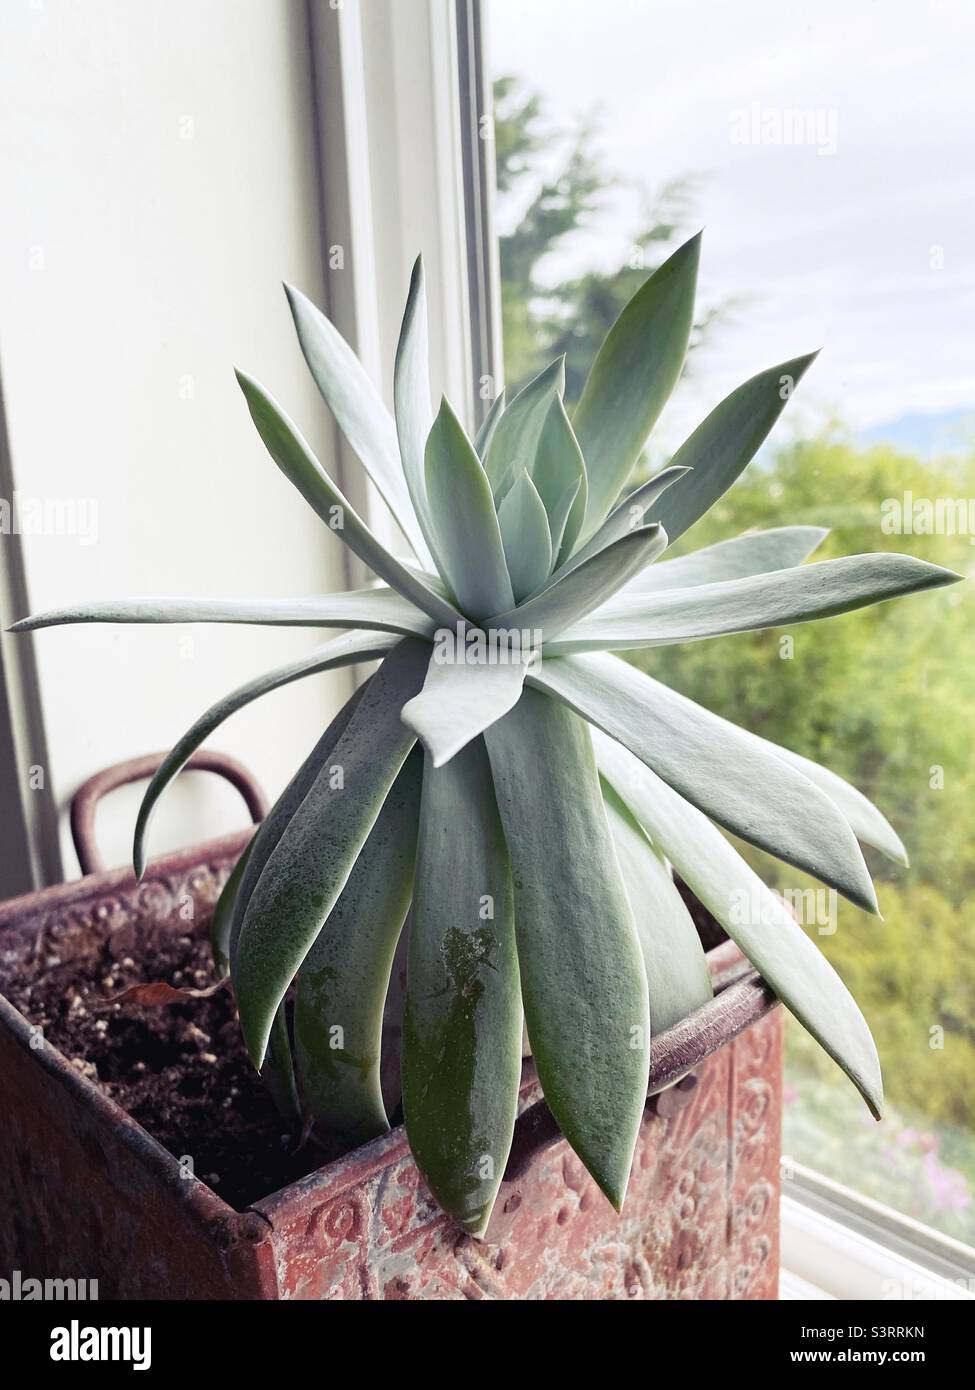 Dudleya succulent plant in a container on a windowsill. Stock Photo